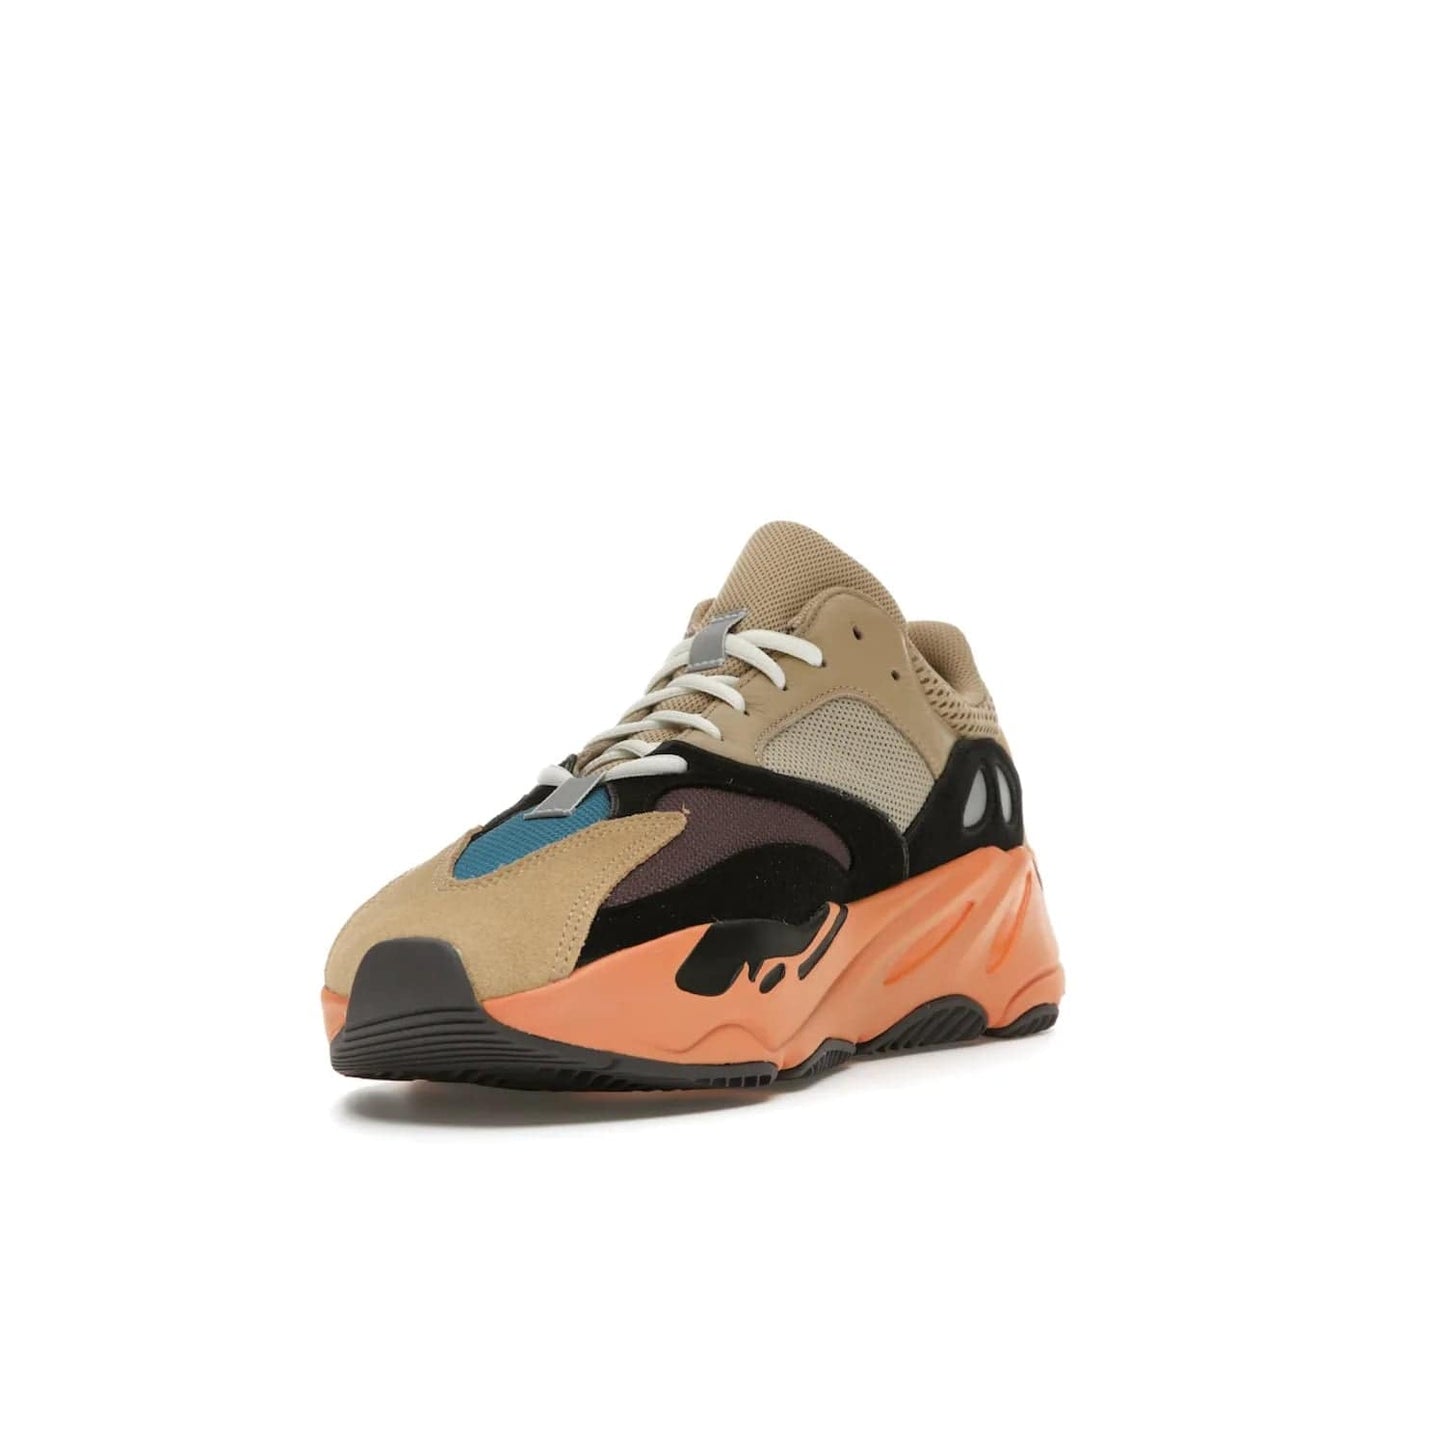 adidas Yeezy Boost 700 Enflame Amber - Image 13 - Only at www.BallersClubKickz.com - Adidas Yeezy Boost 700 Enflame Amber: Eye-catching design with pale yellow, brown, teal, and orange! Get yours in June 2021.